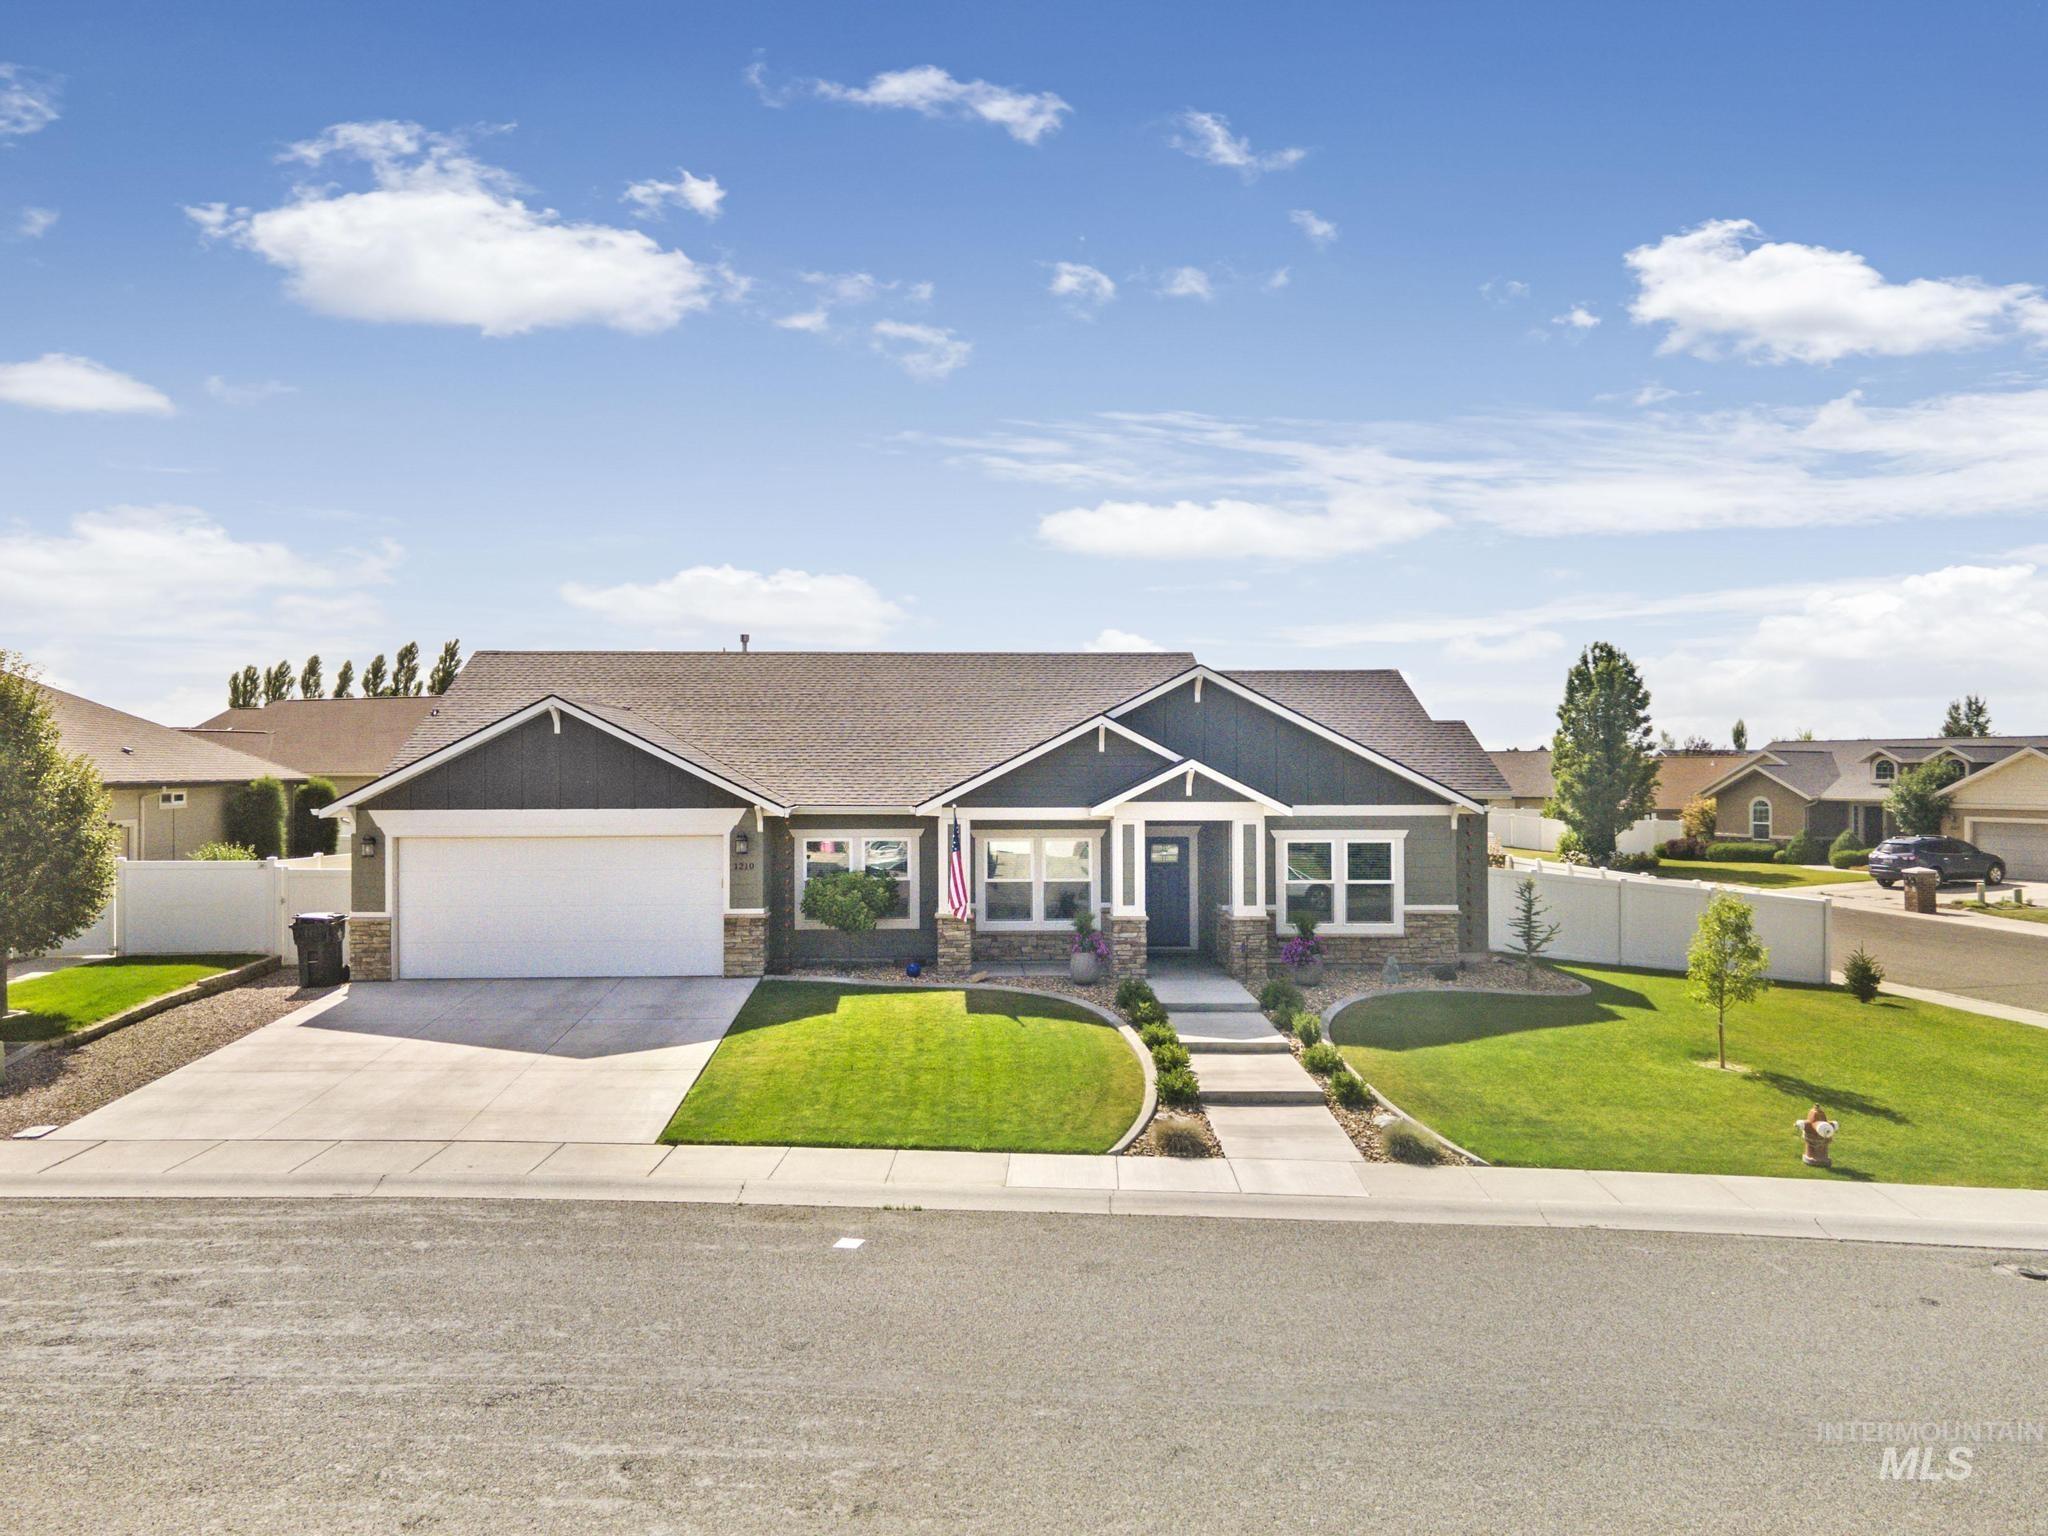 1210 Cole St., Kimberly, Idaho 83341, 4 Bedrooms, 2 Bathrooms, Residential For Sale, Price $479,000,MLS 98851921